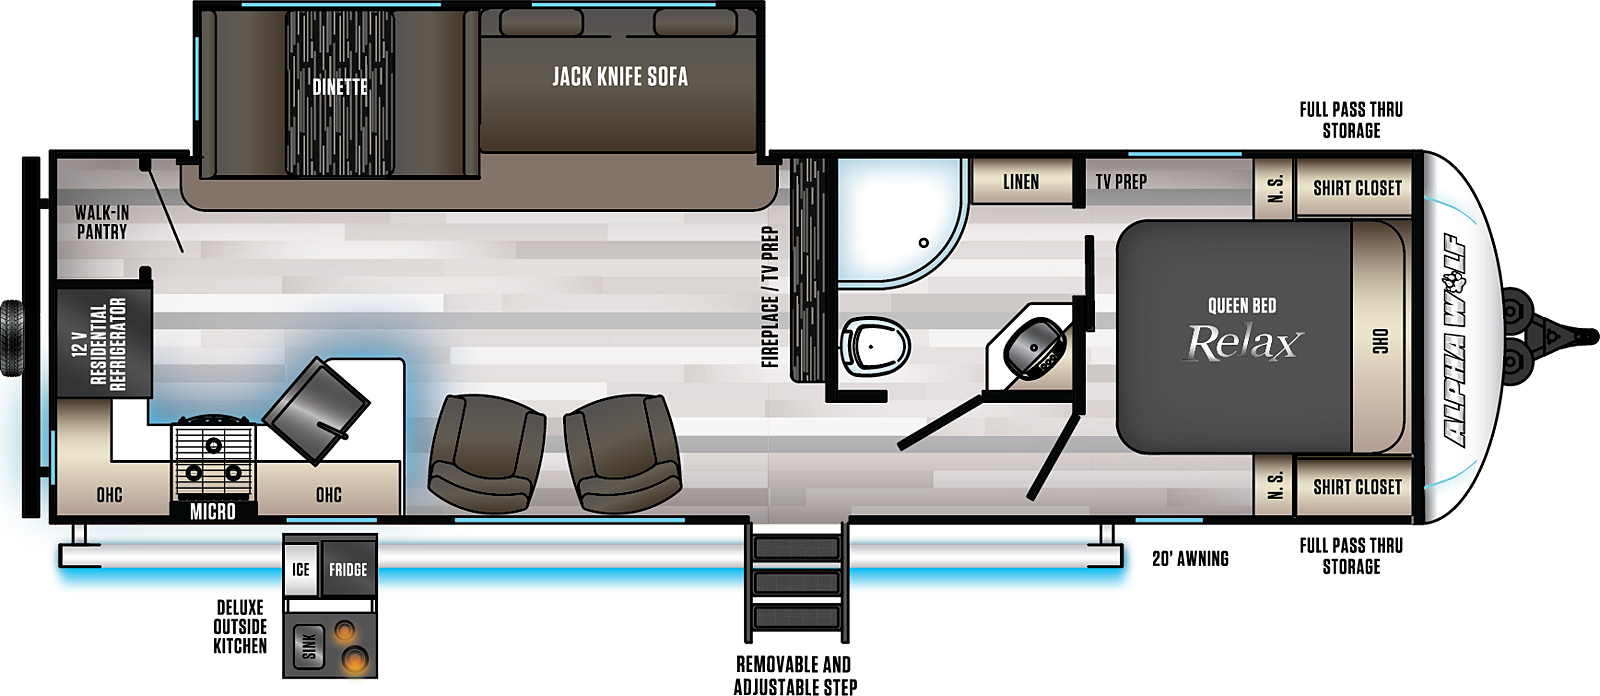 The 27RK- L has one slide out on the off-door side and one entry door. A 20 foot awning starting from the rear covers the deluxe outside kitchen and entry door. There is a full pass through storage at the front of the travel trailer. Interior layout from front to back: front bedroom with foot facing queen bed; Side aisle pass through bathroom; living area with fireplace, TV prep, two recliners on the door side and a off-door side slide out containing a dinette and jackknife sofa; rear kitchen with L shaped counter on back wall and rear wall walk-in pantry.